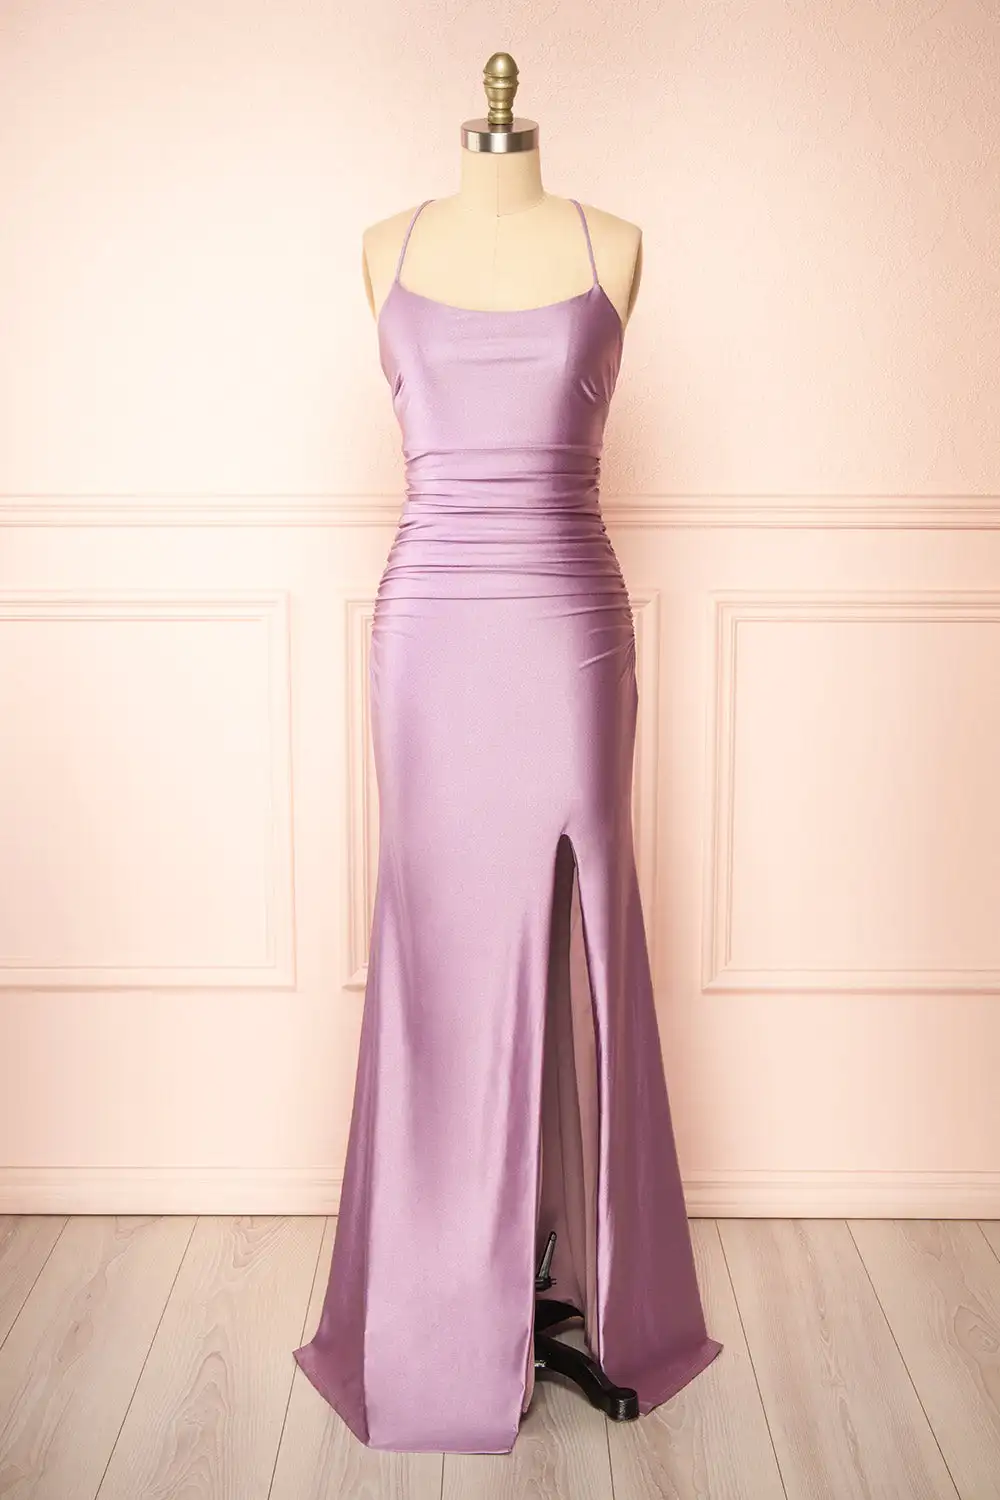 

Lilac Satin Bodycon Long Evening Dresses Elegant Spaghetti Straps Backless Lace Up High Split Party Gowns Women's Dancing Dress